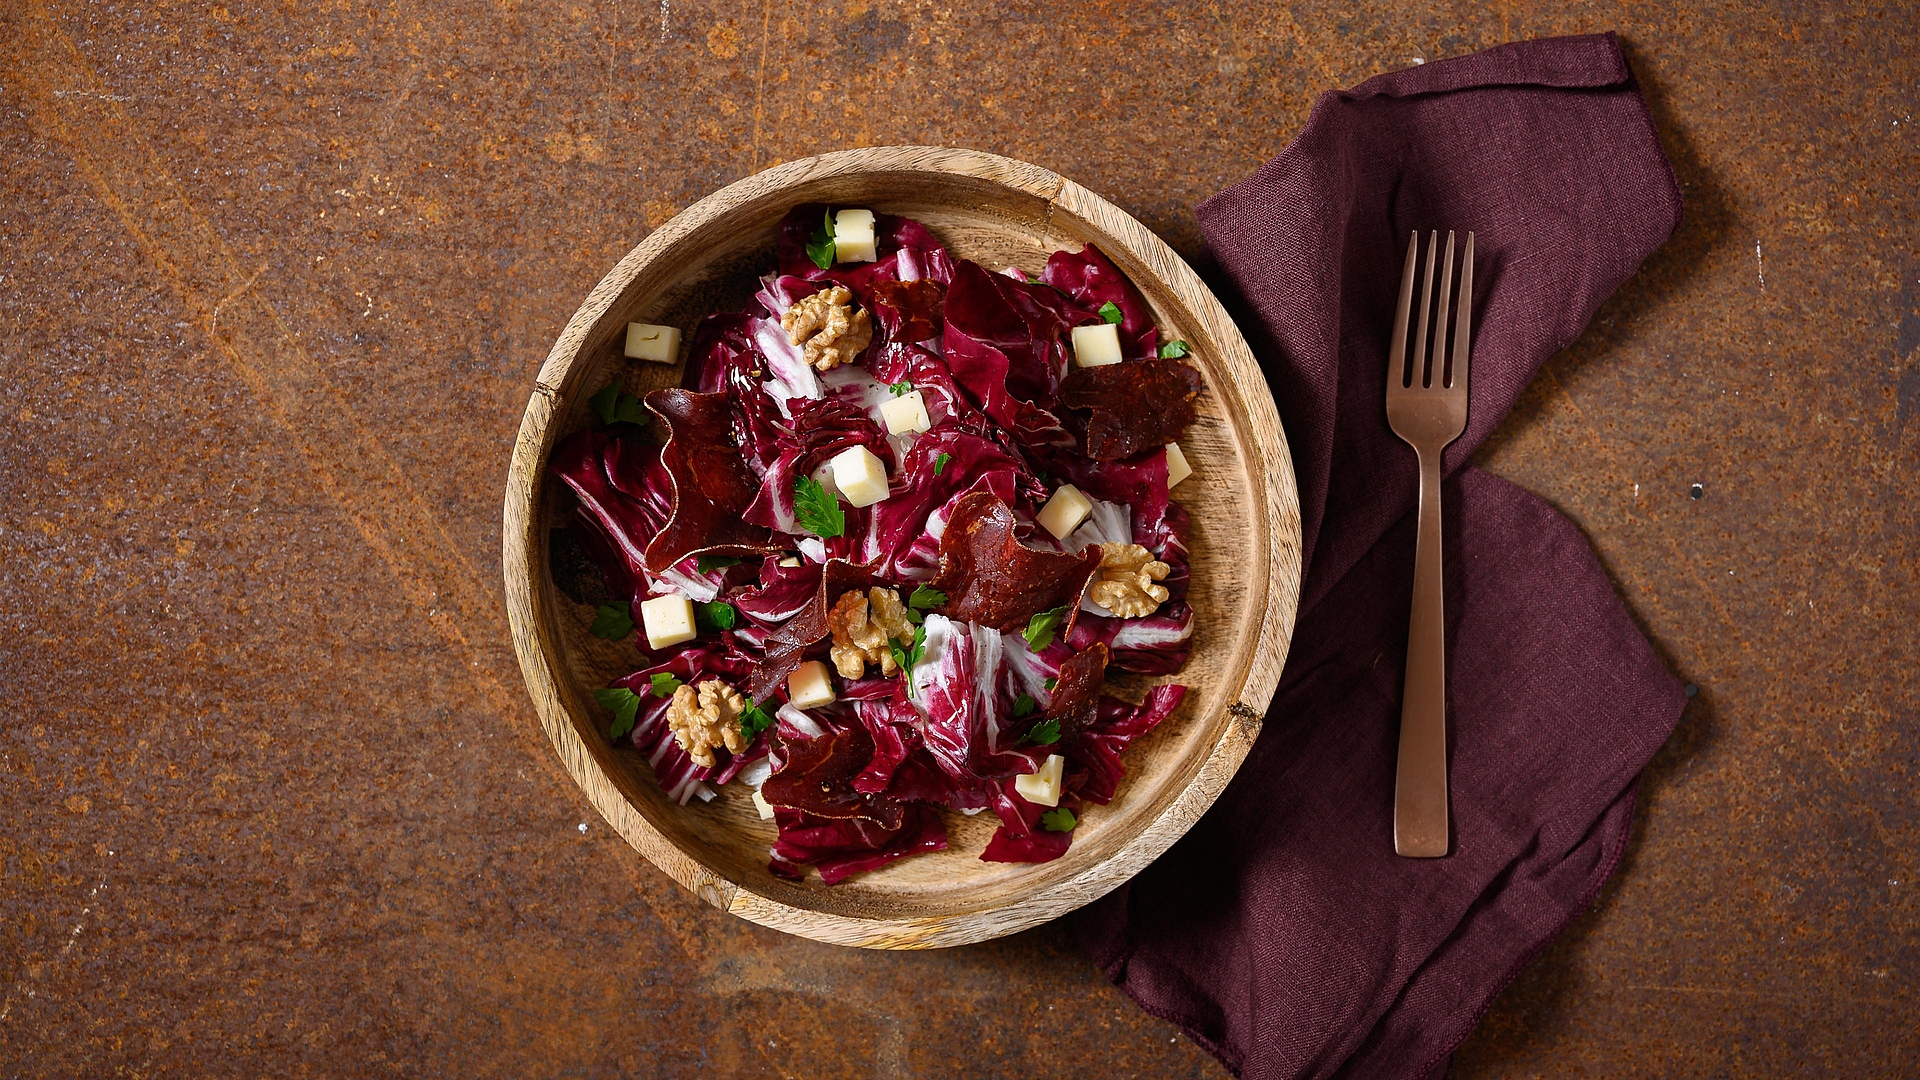 Radicchio with dry-cured Grisons beef, walnuts and goat's cheese